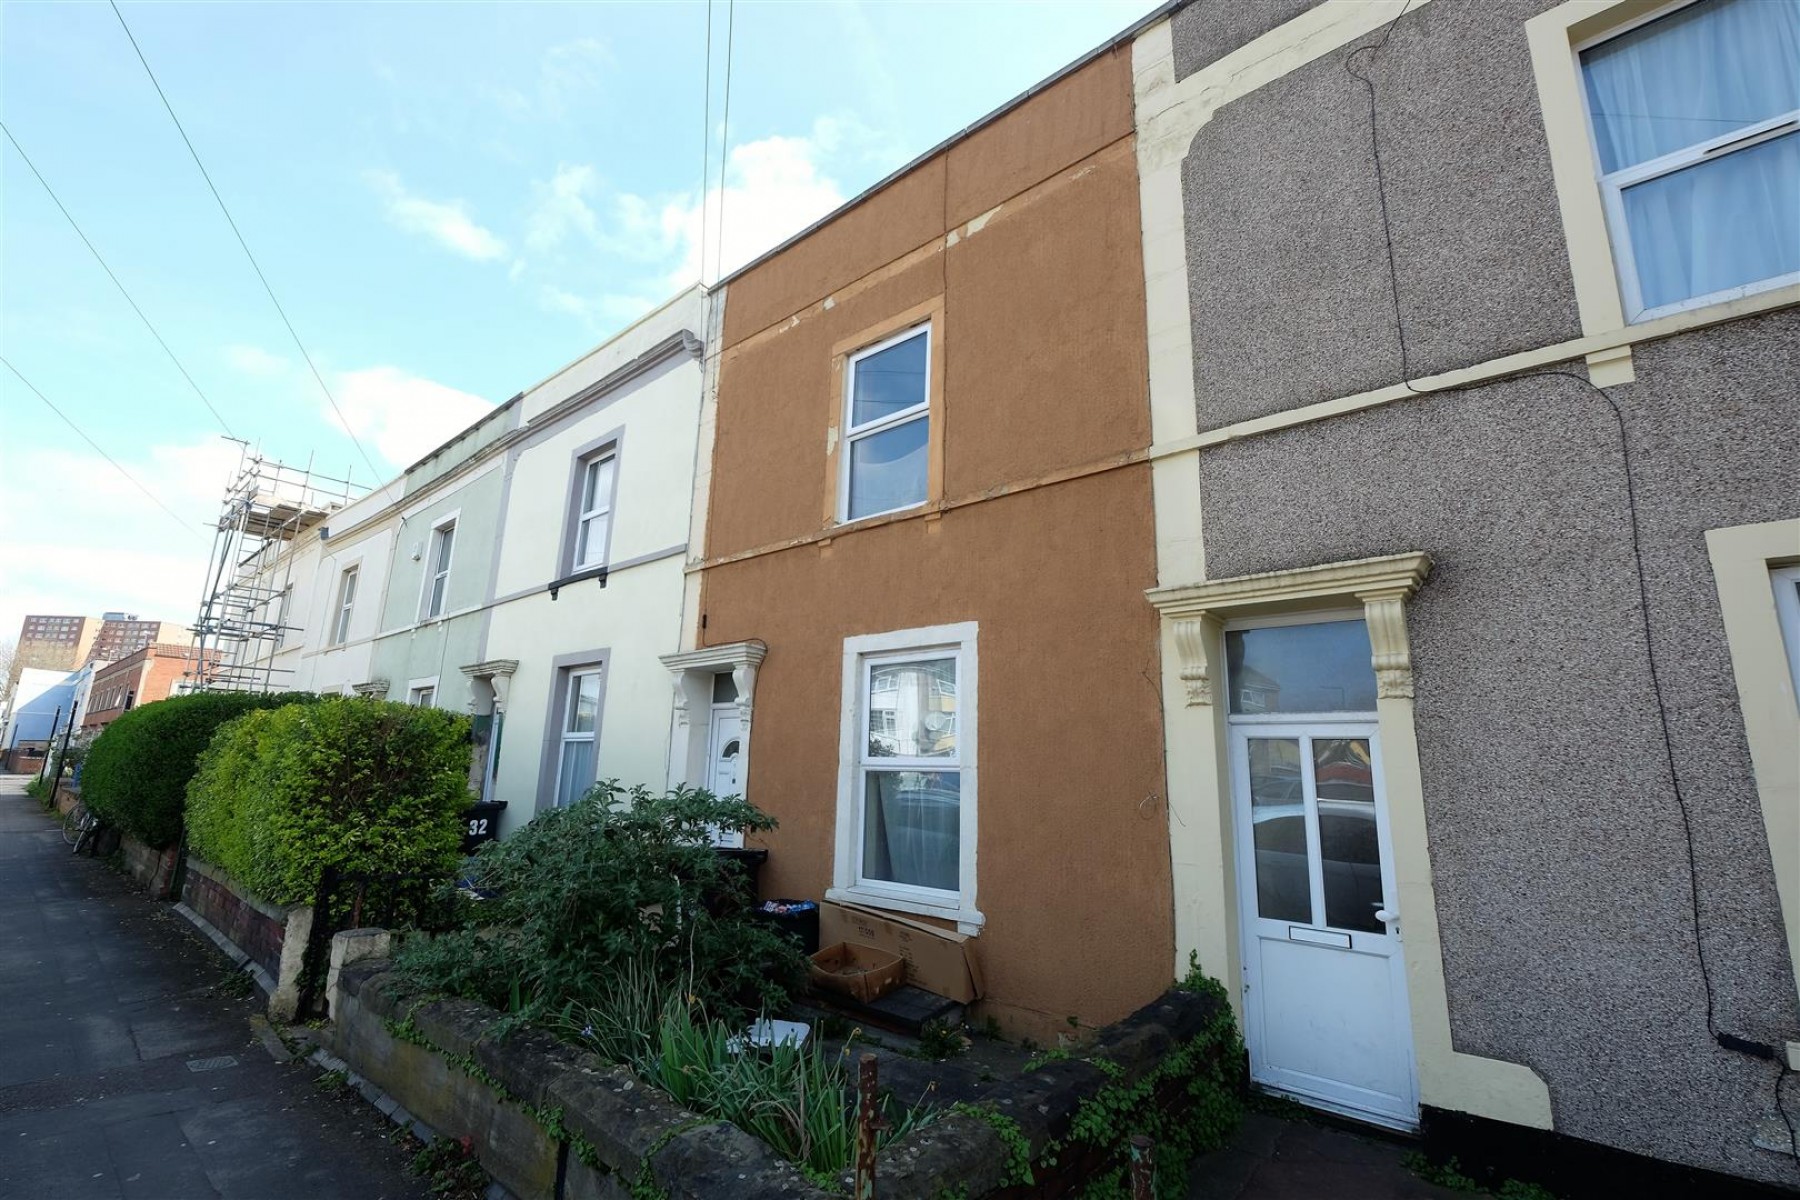 Images for CURRENTLY LET FOR £17k - Goodhind St, Easton